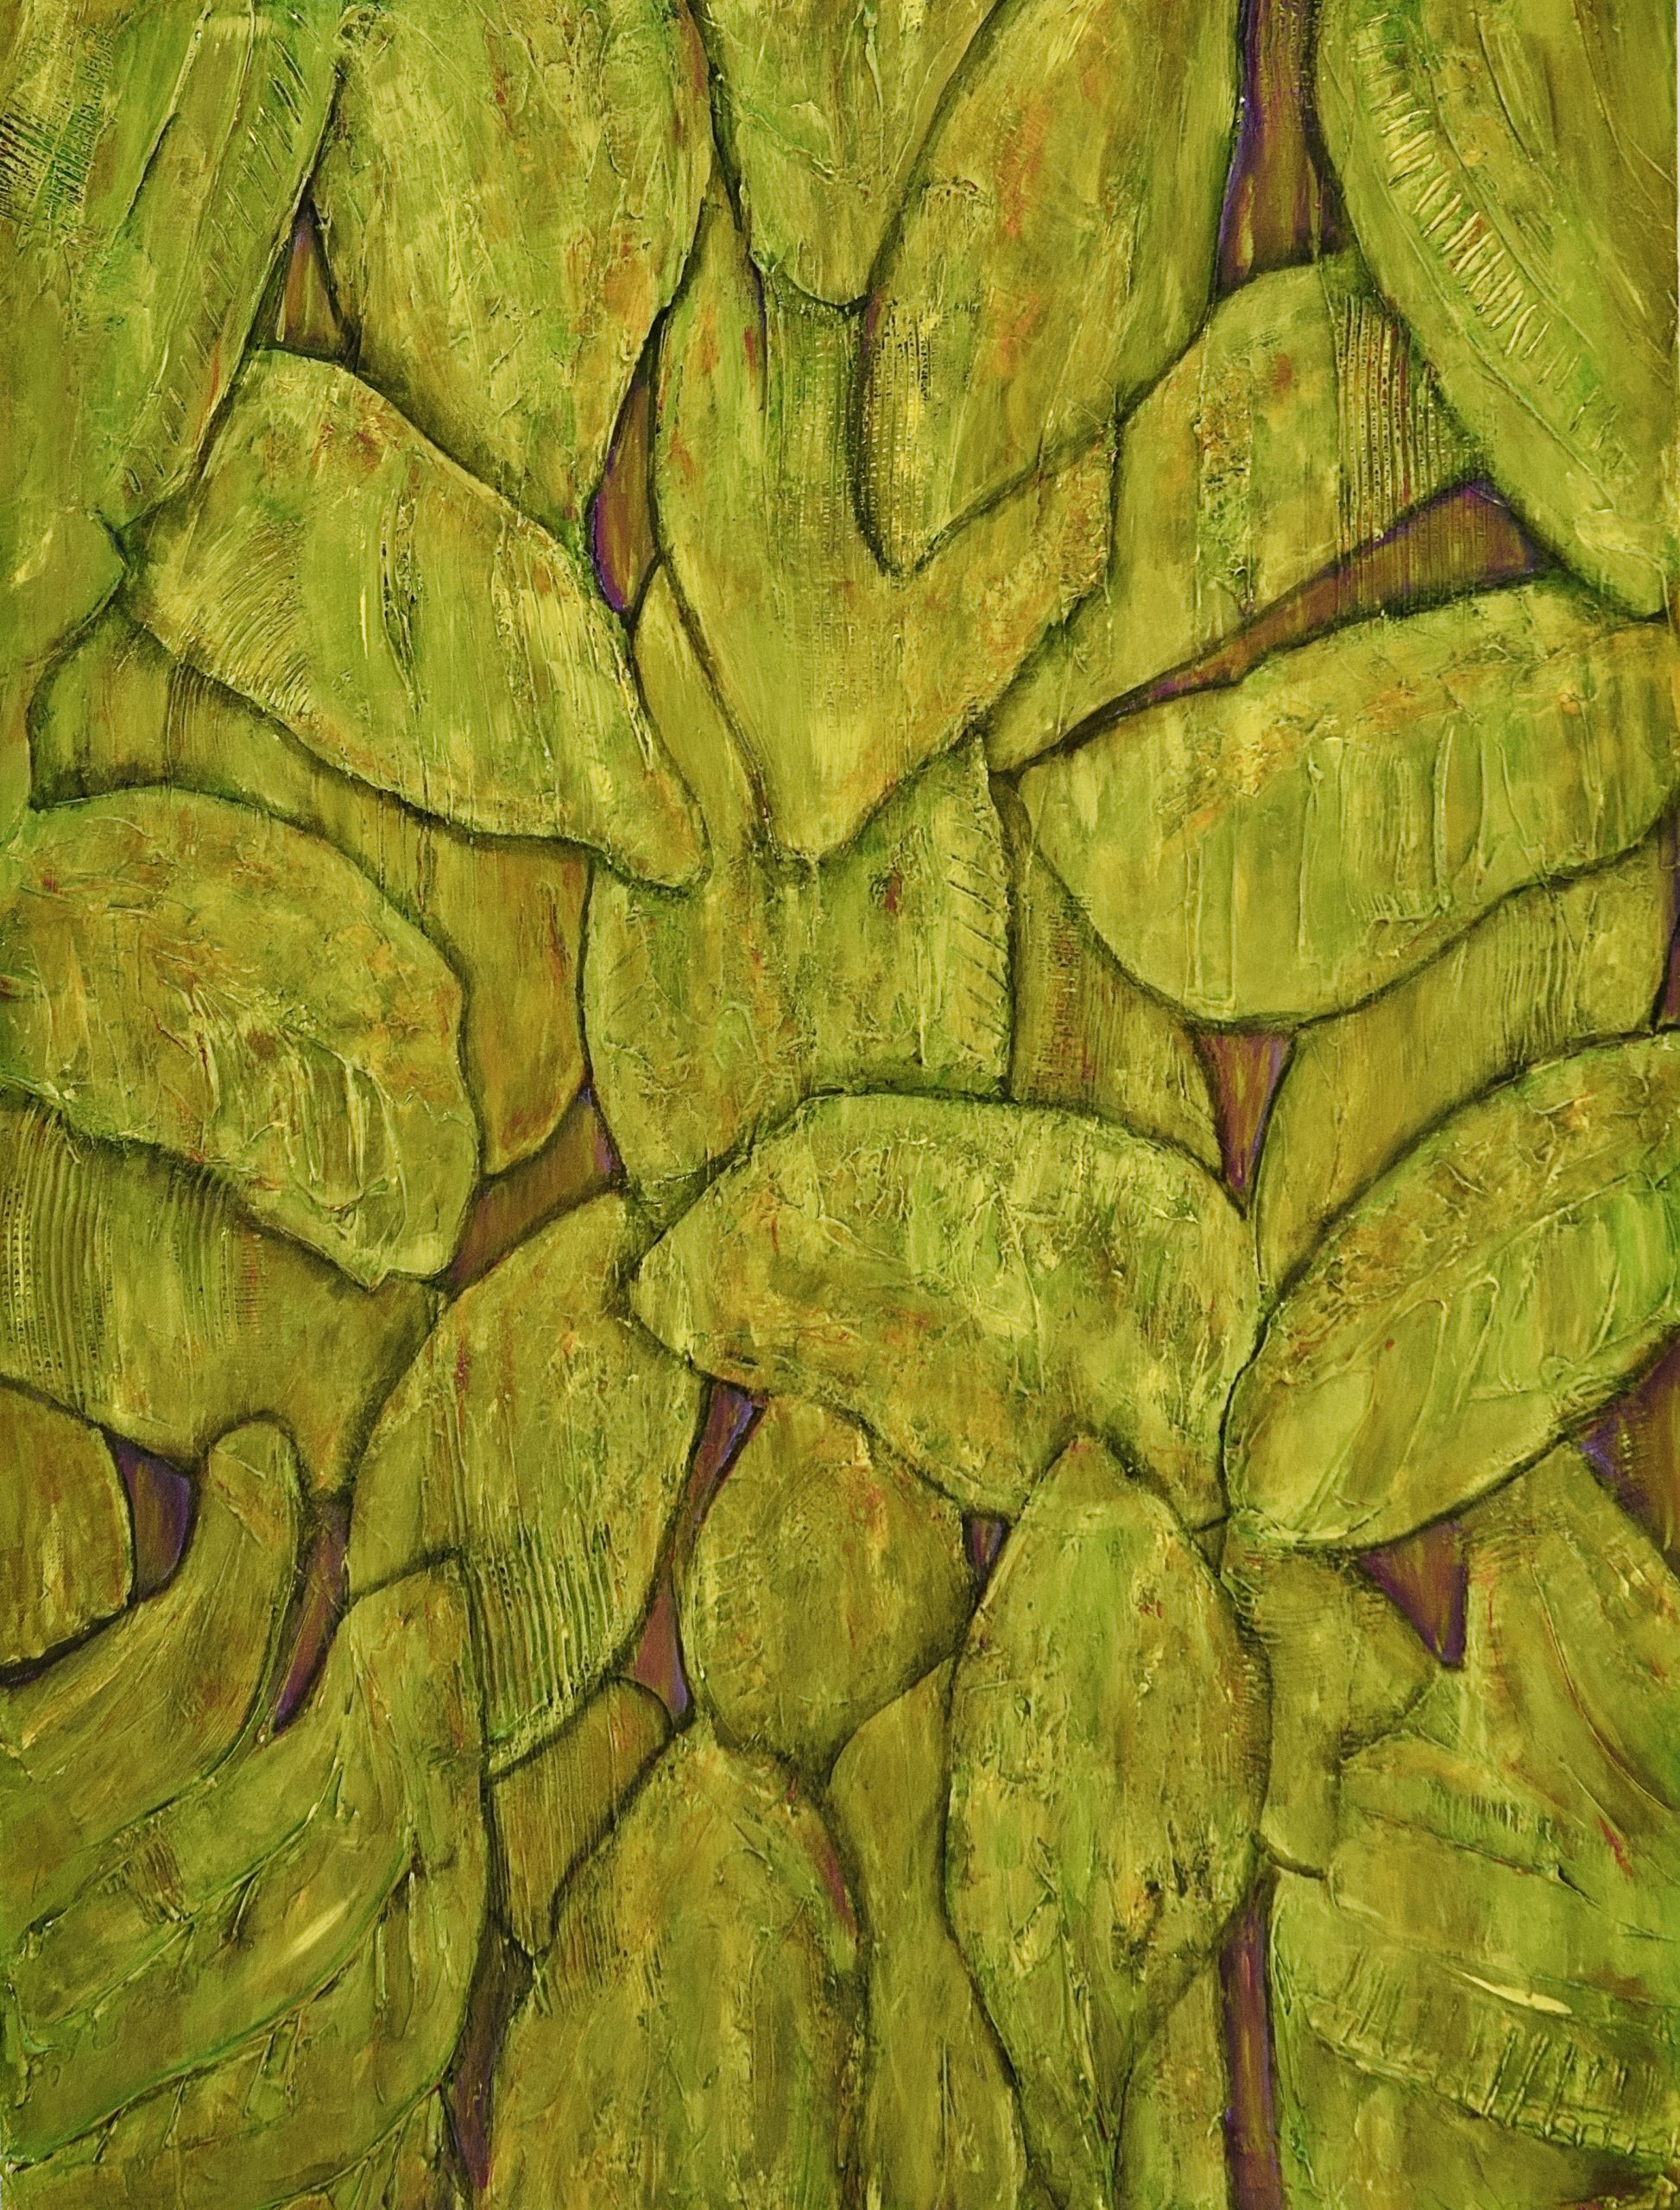 Turning Over a New Leaf. Acrylic on canvas. 40"x 30". 2020